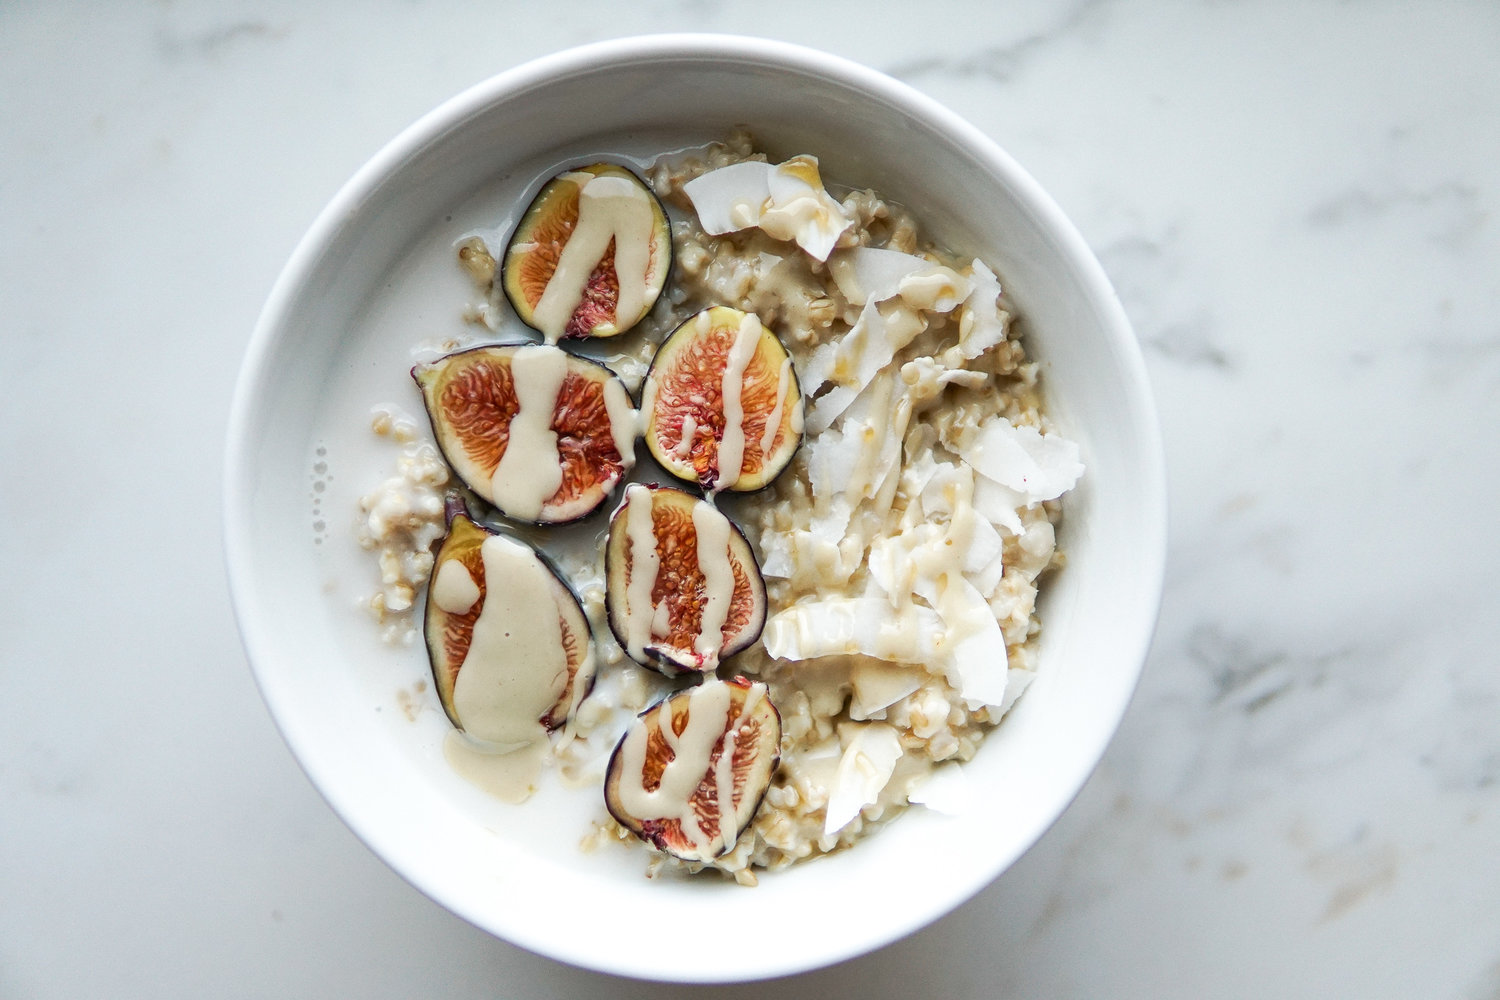 Steel cut oats with figs, coconut and tahini drizzle